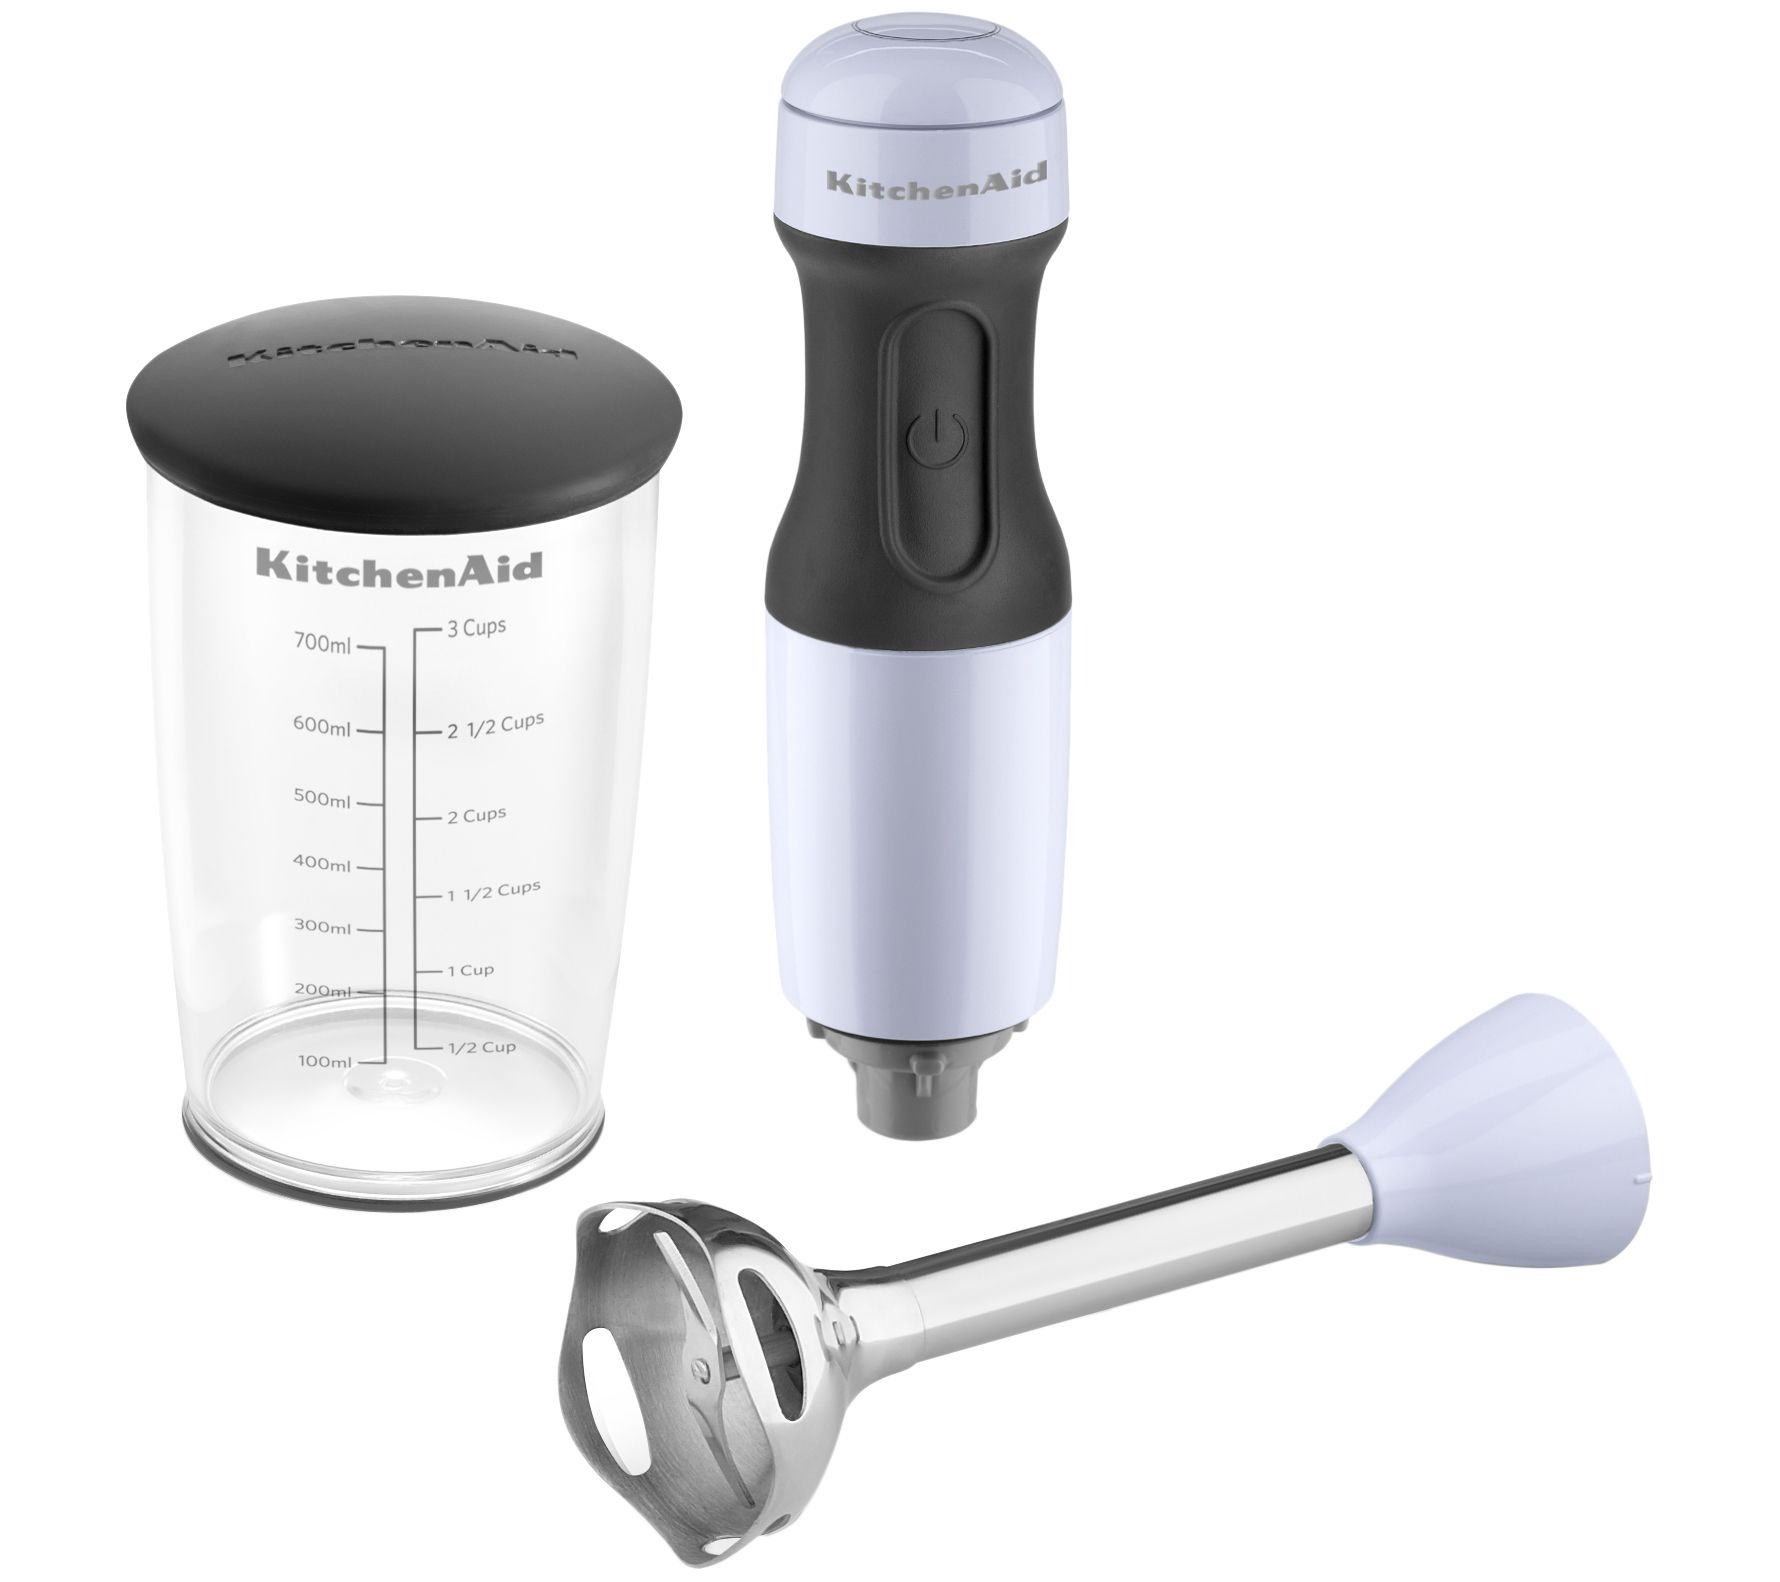 Toastmaster Immersion Hand Blender, 25 oz Cup Included, 2 Speeds, Brand New